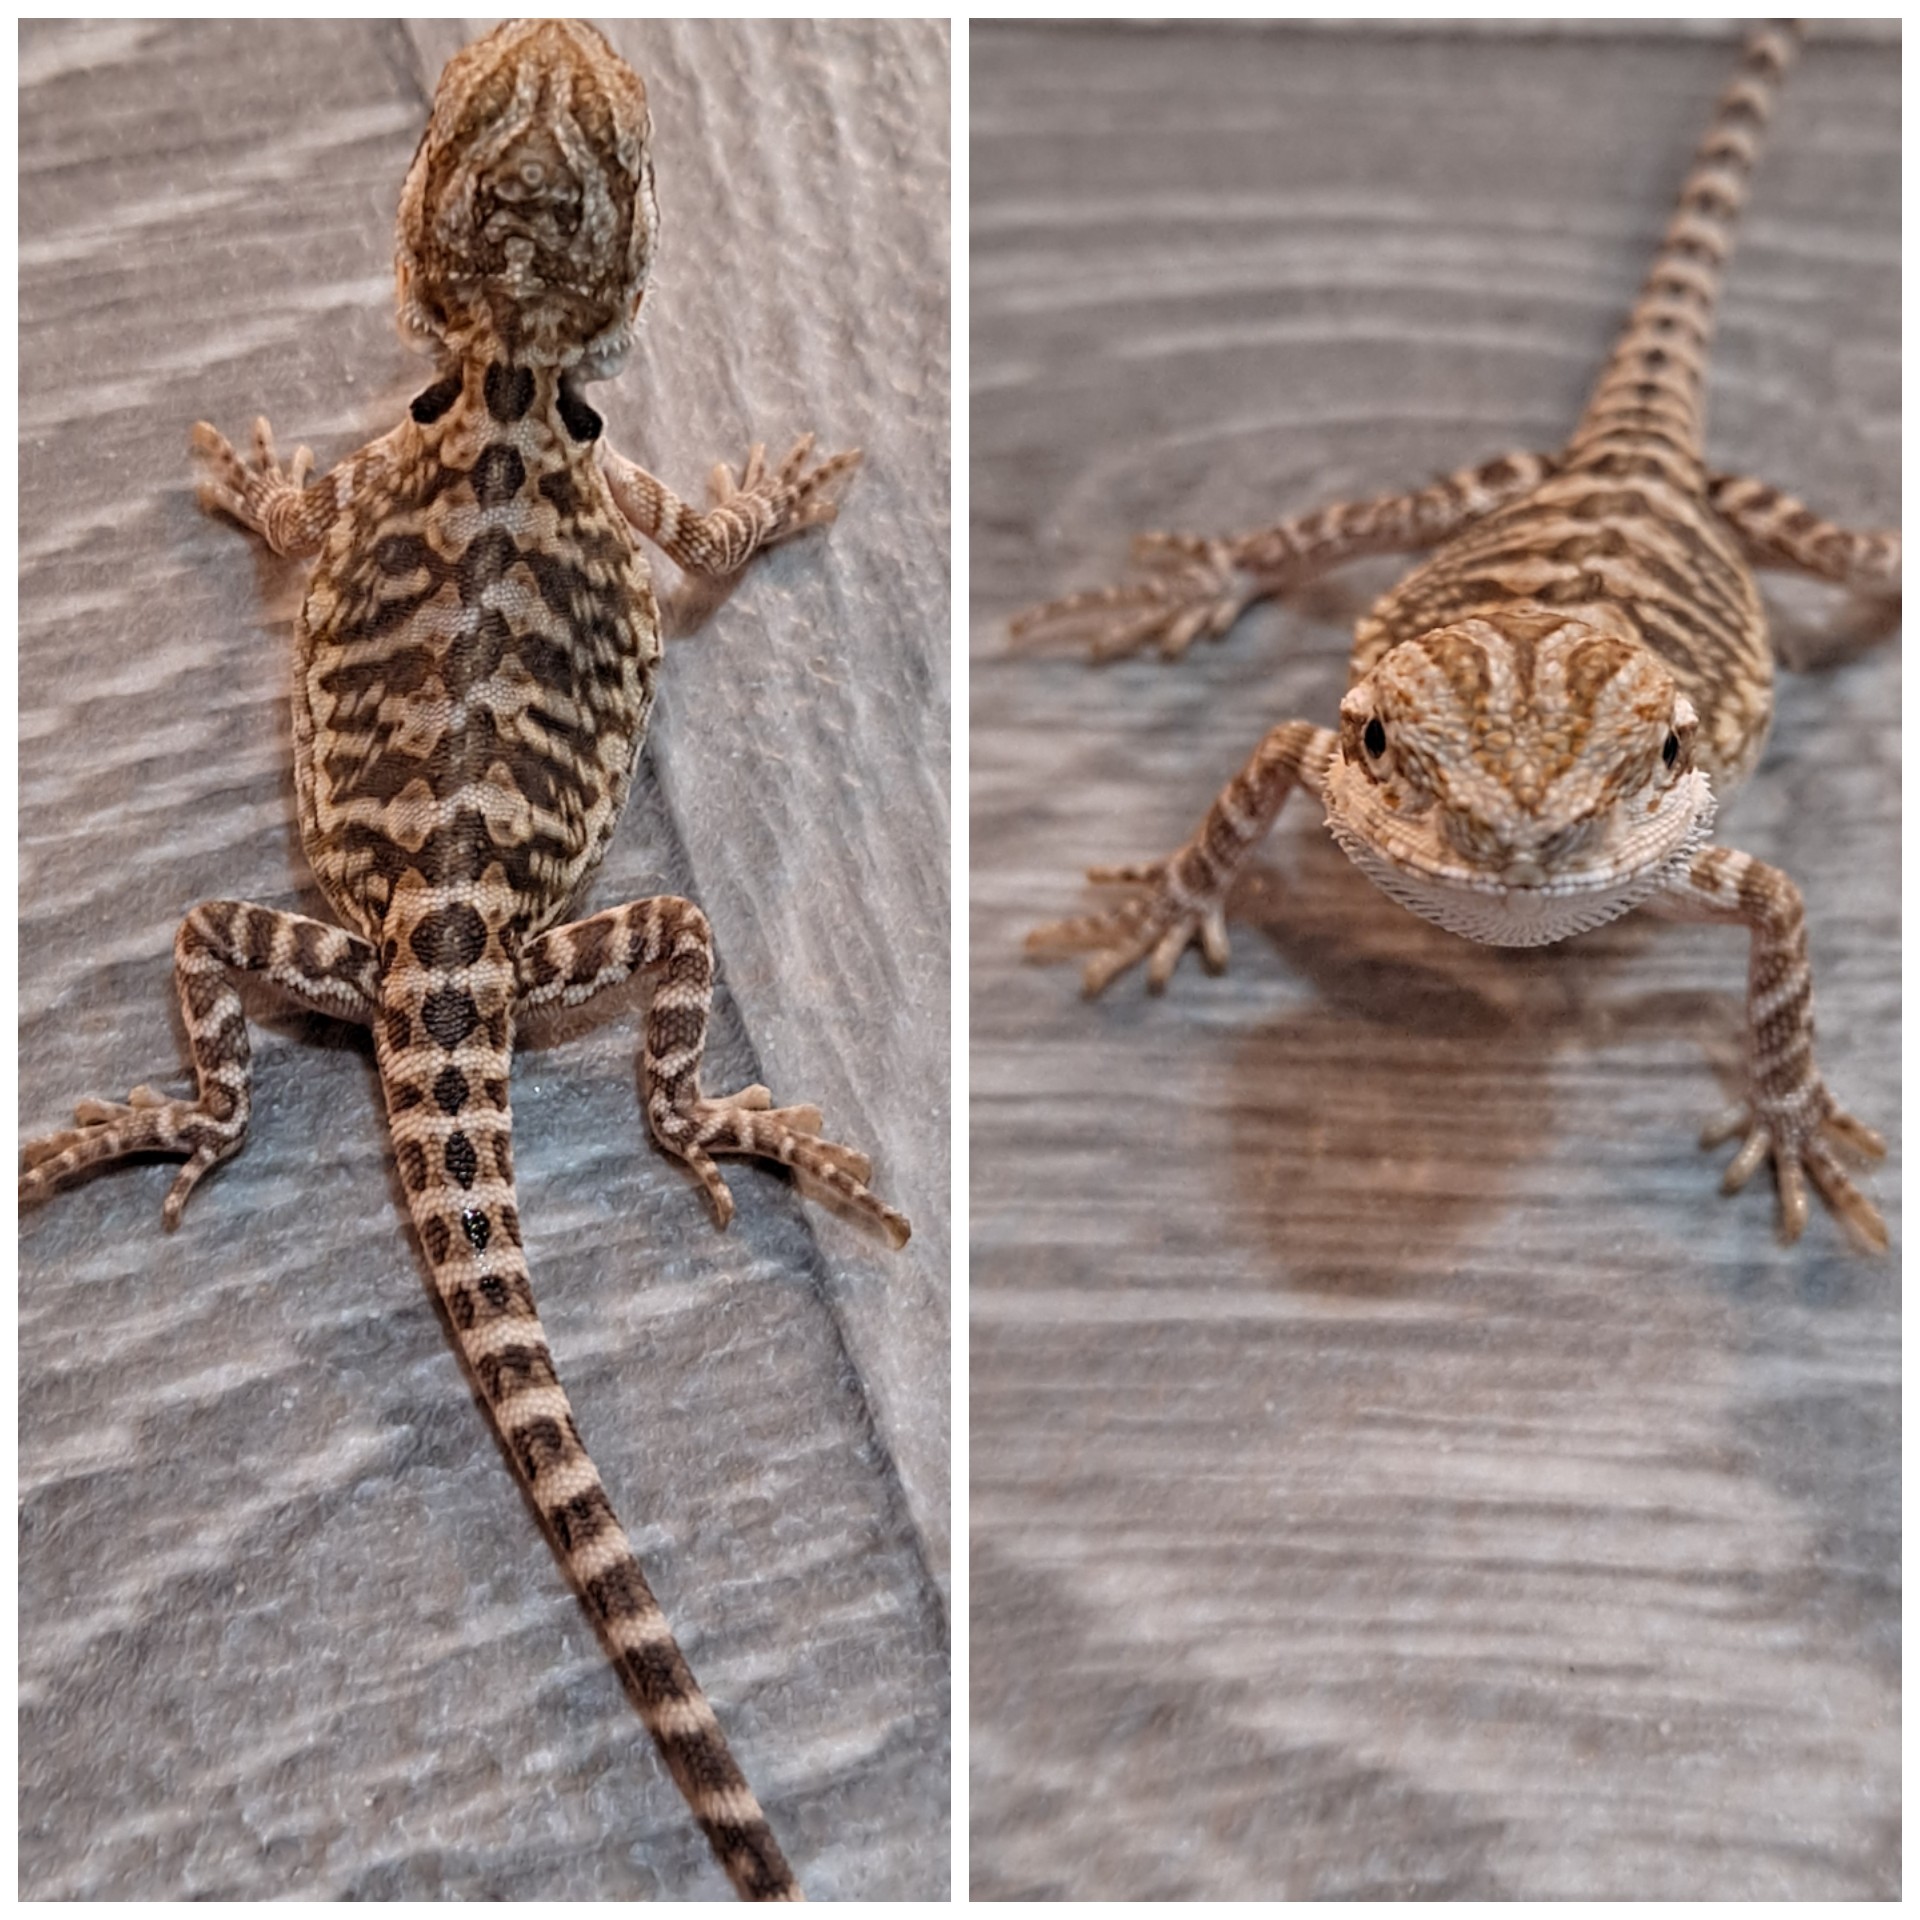 Female Super Leatherback Central Bearded Dragon by Baxter's Spellbound Dragons